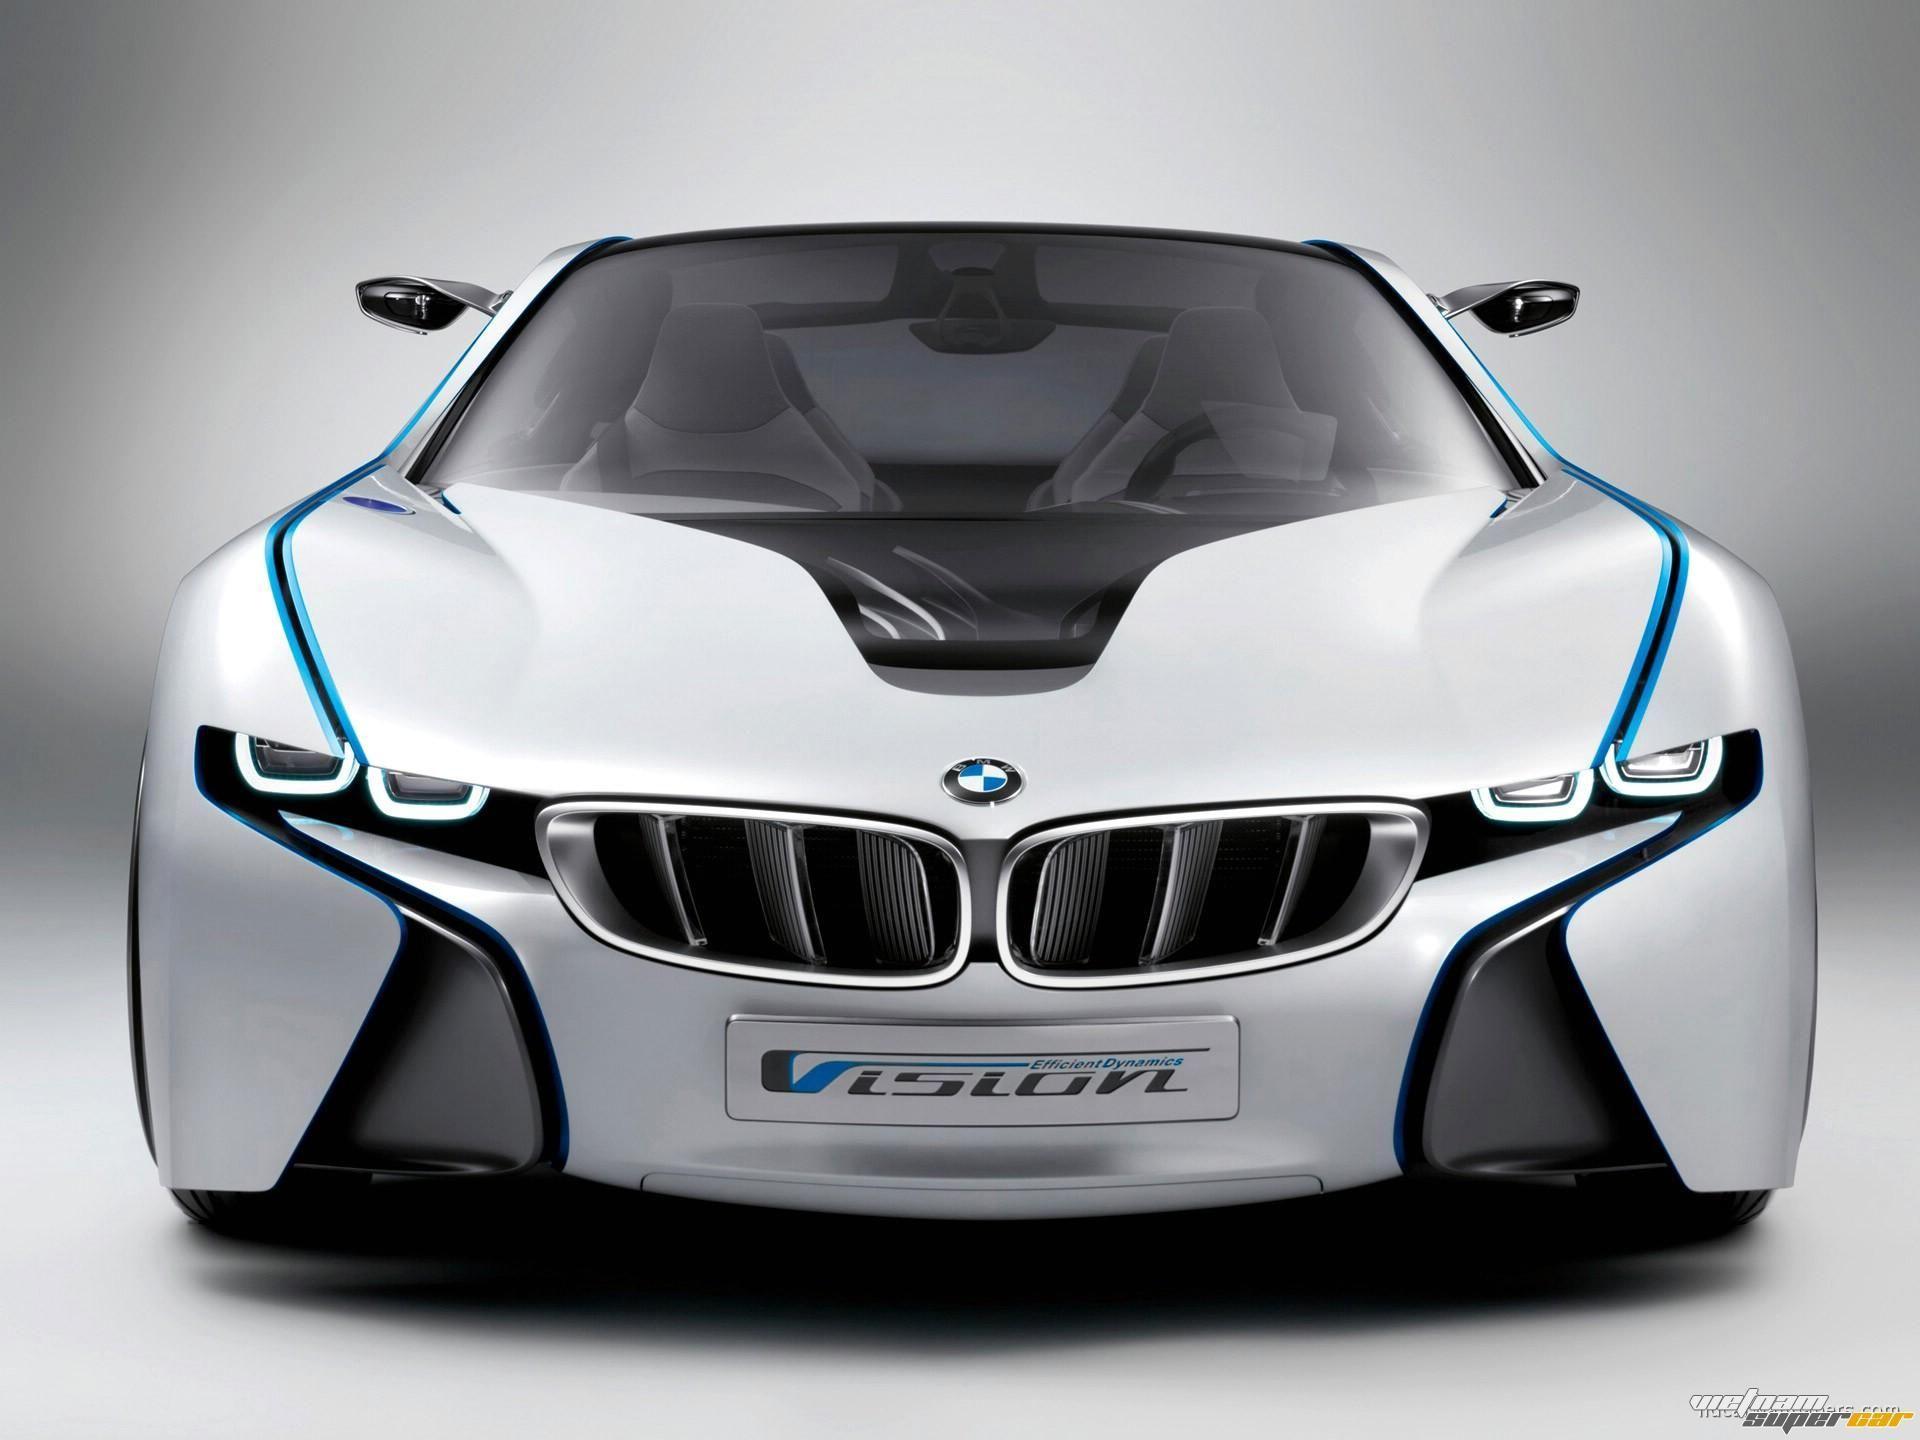 4K BMW Wallpapers  Top Free 4K BMW Backgrounds  WallpaperAccess